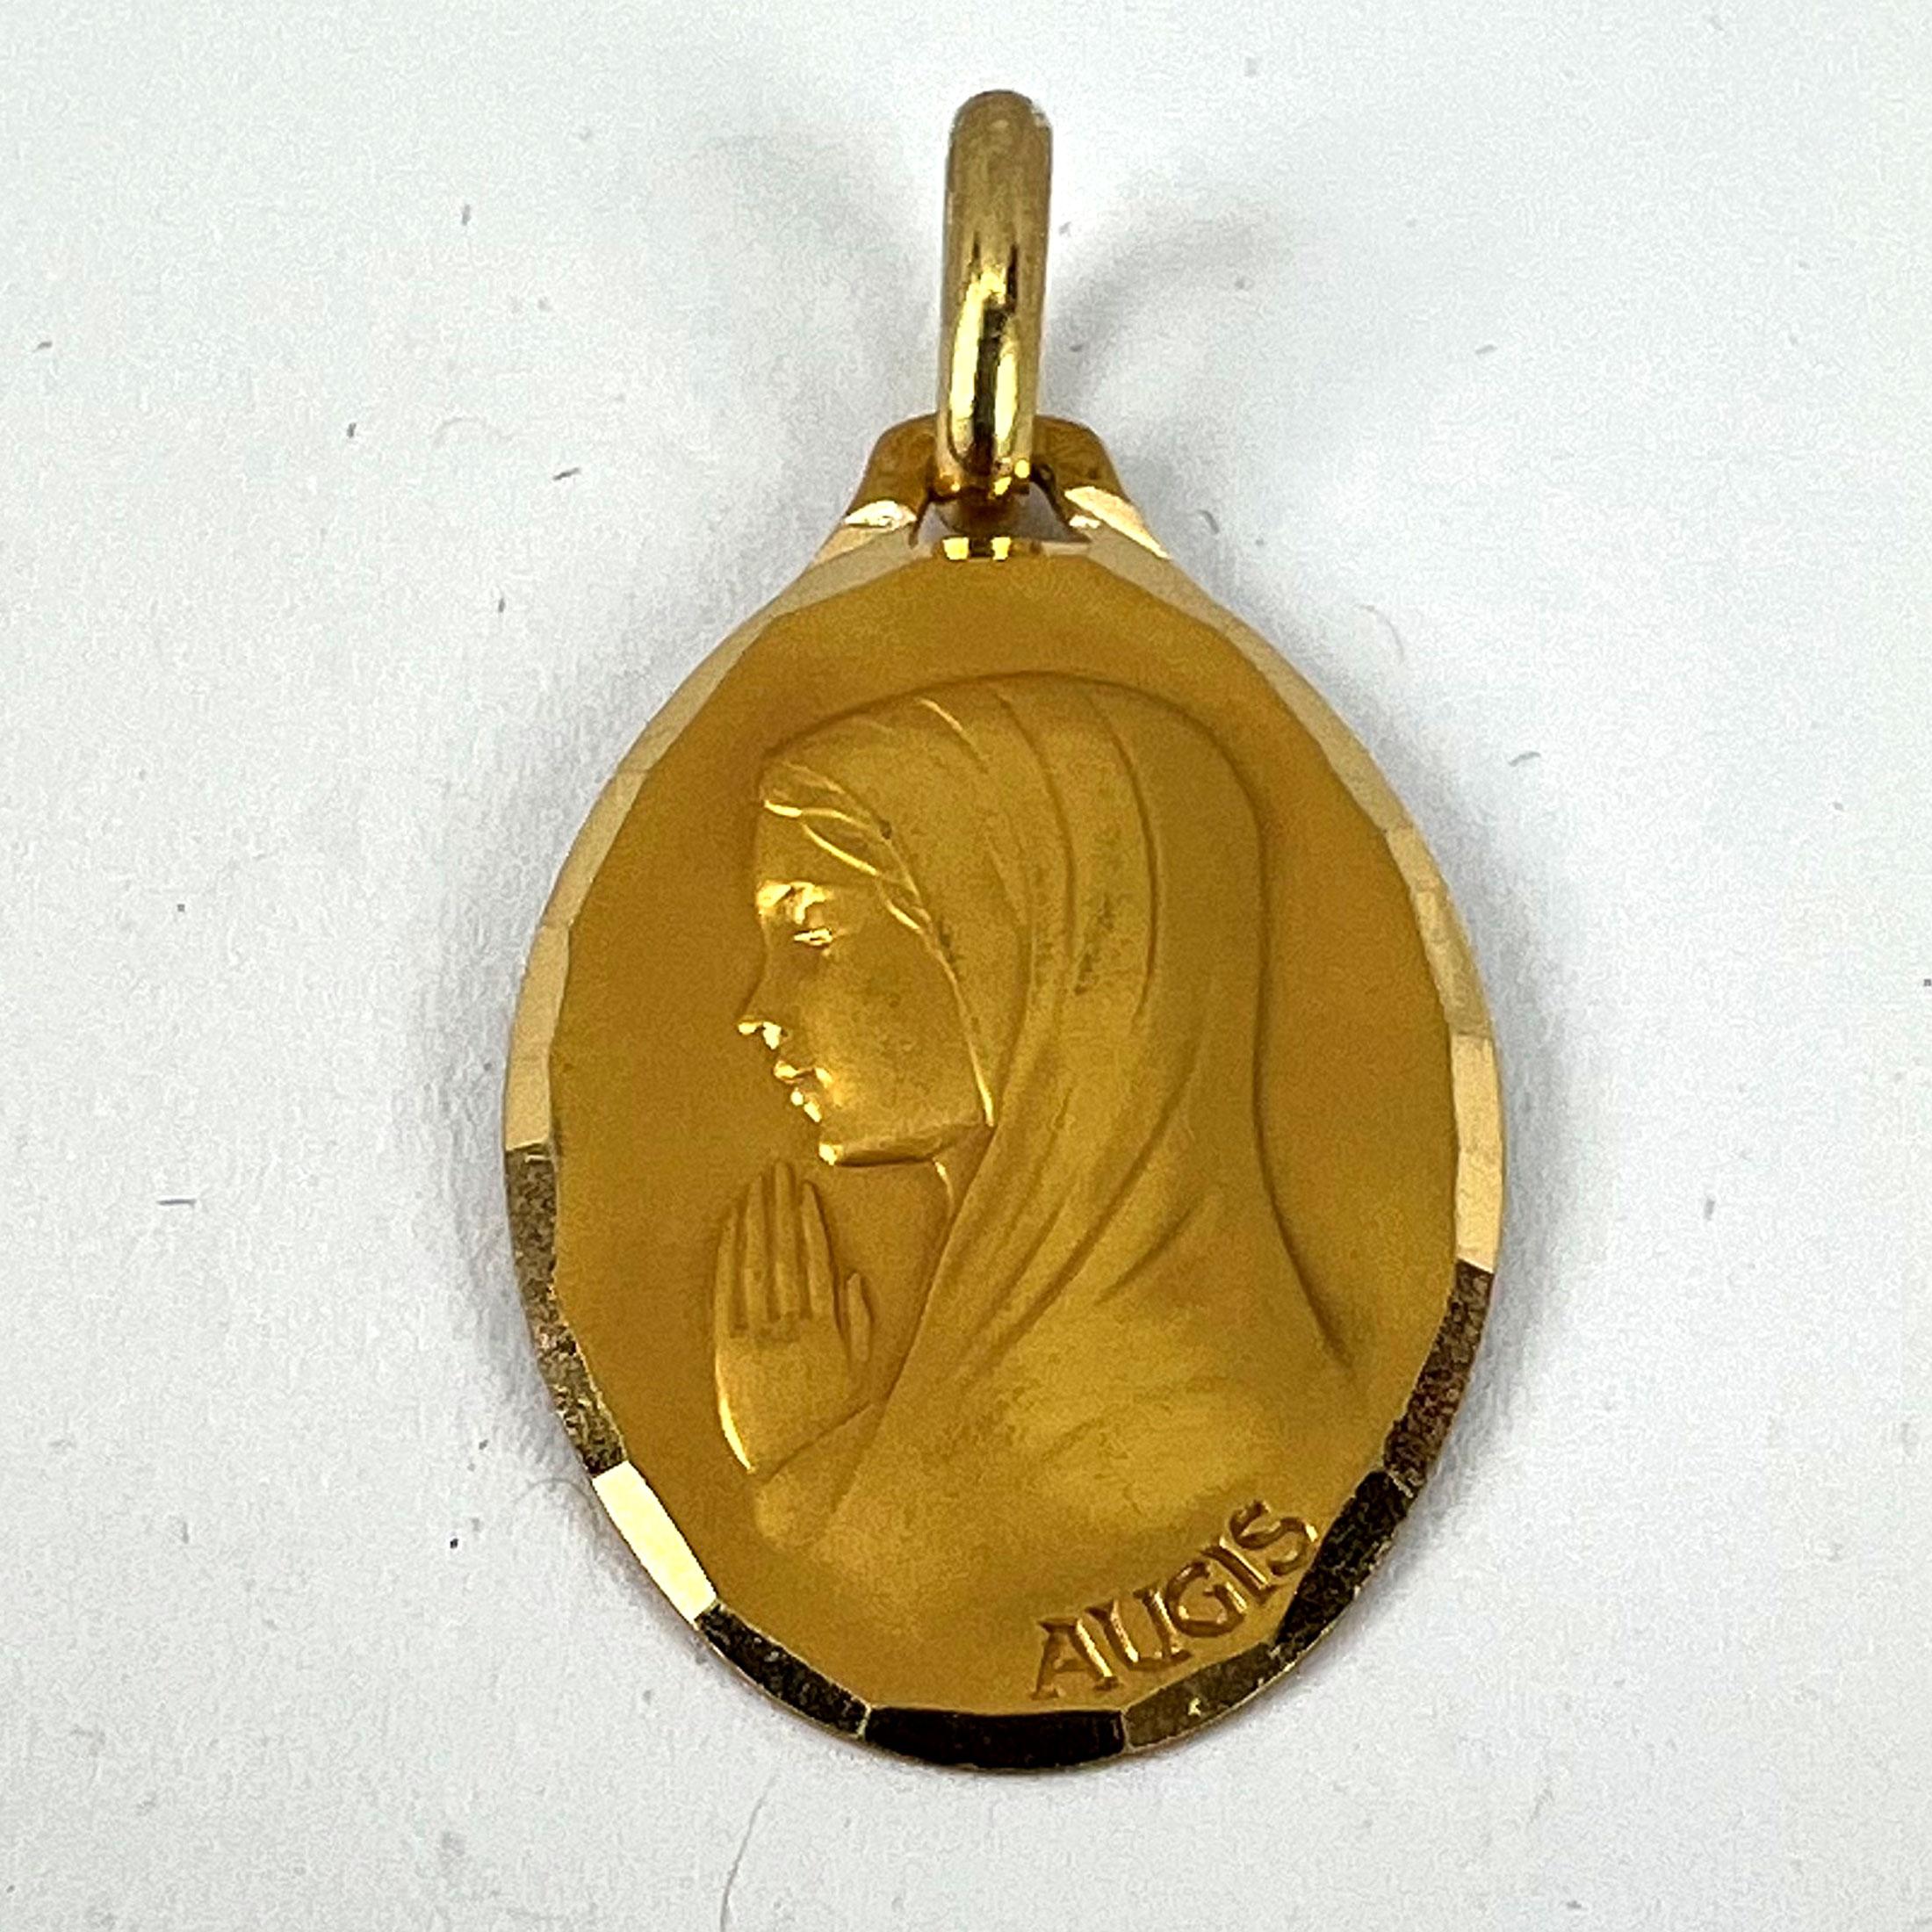 French Augis Virgin Mary 18K Yellow Gold Medal Pendant For Sale 8